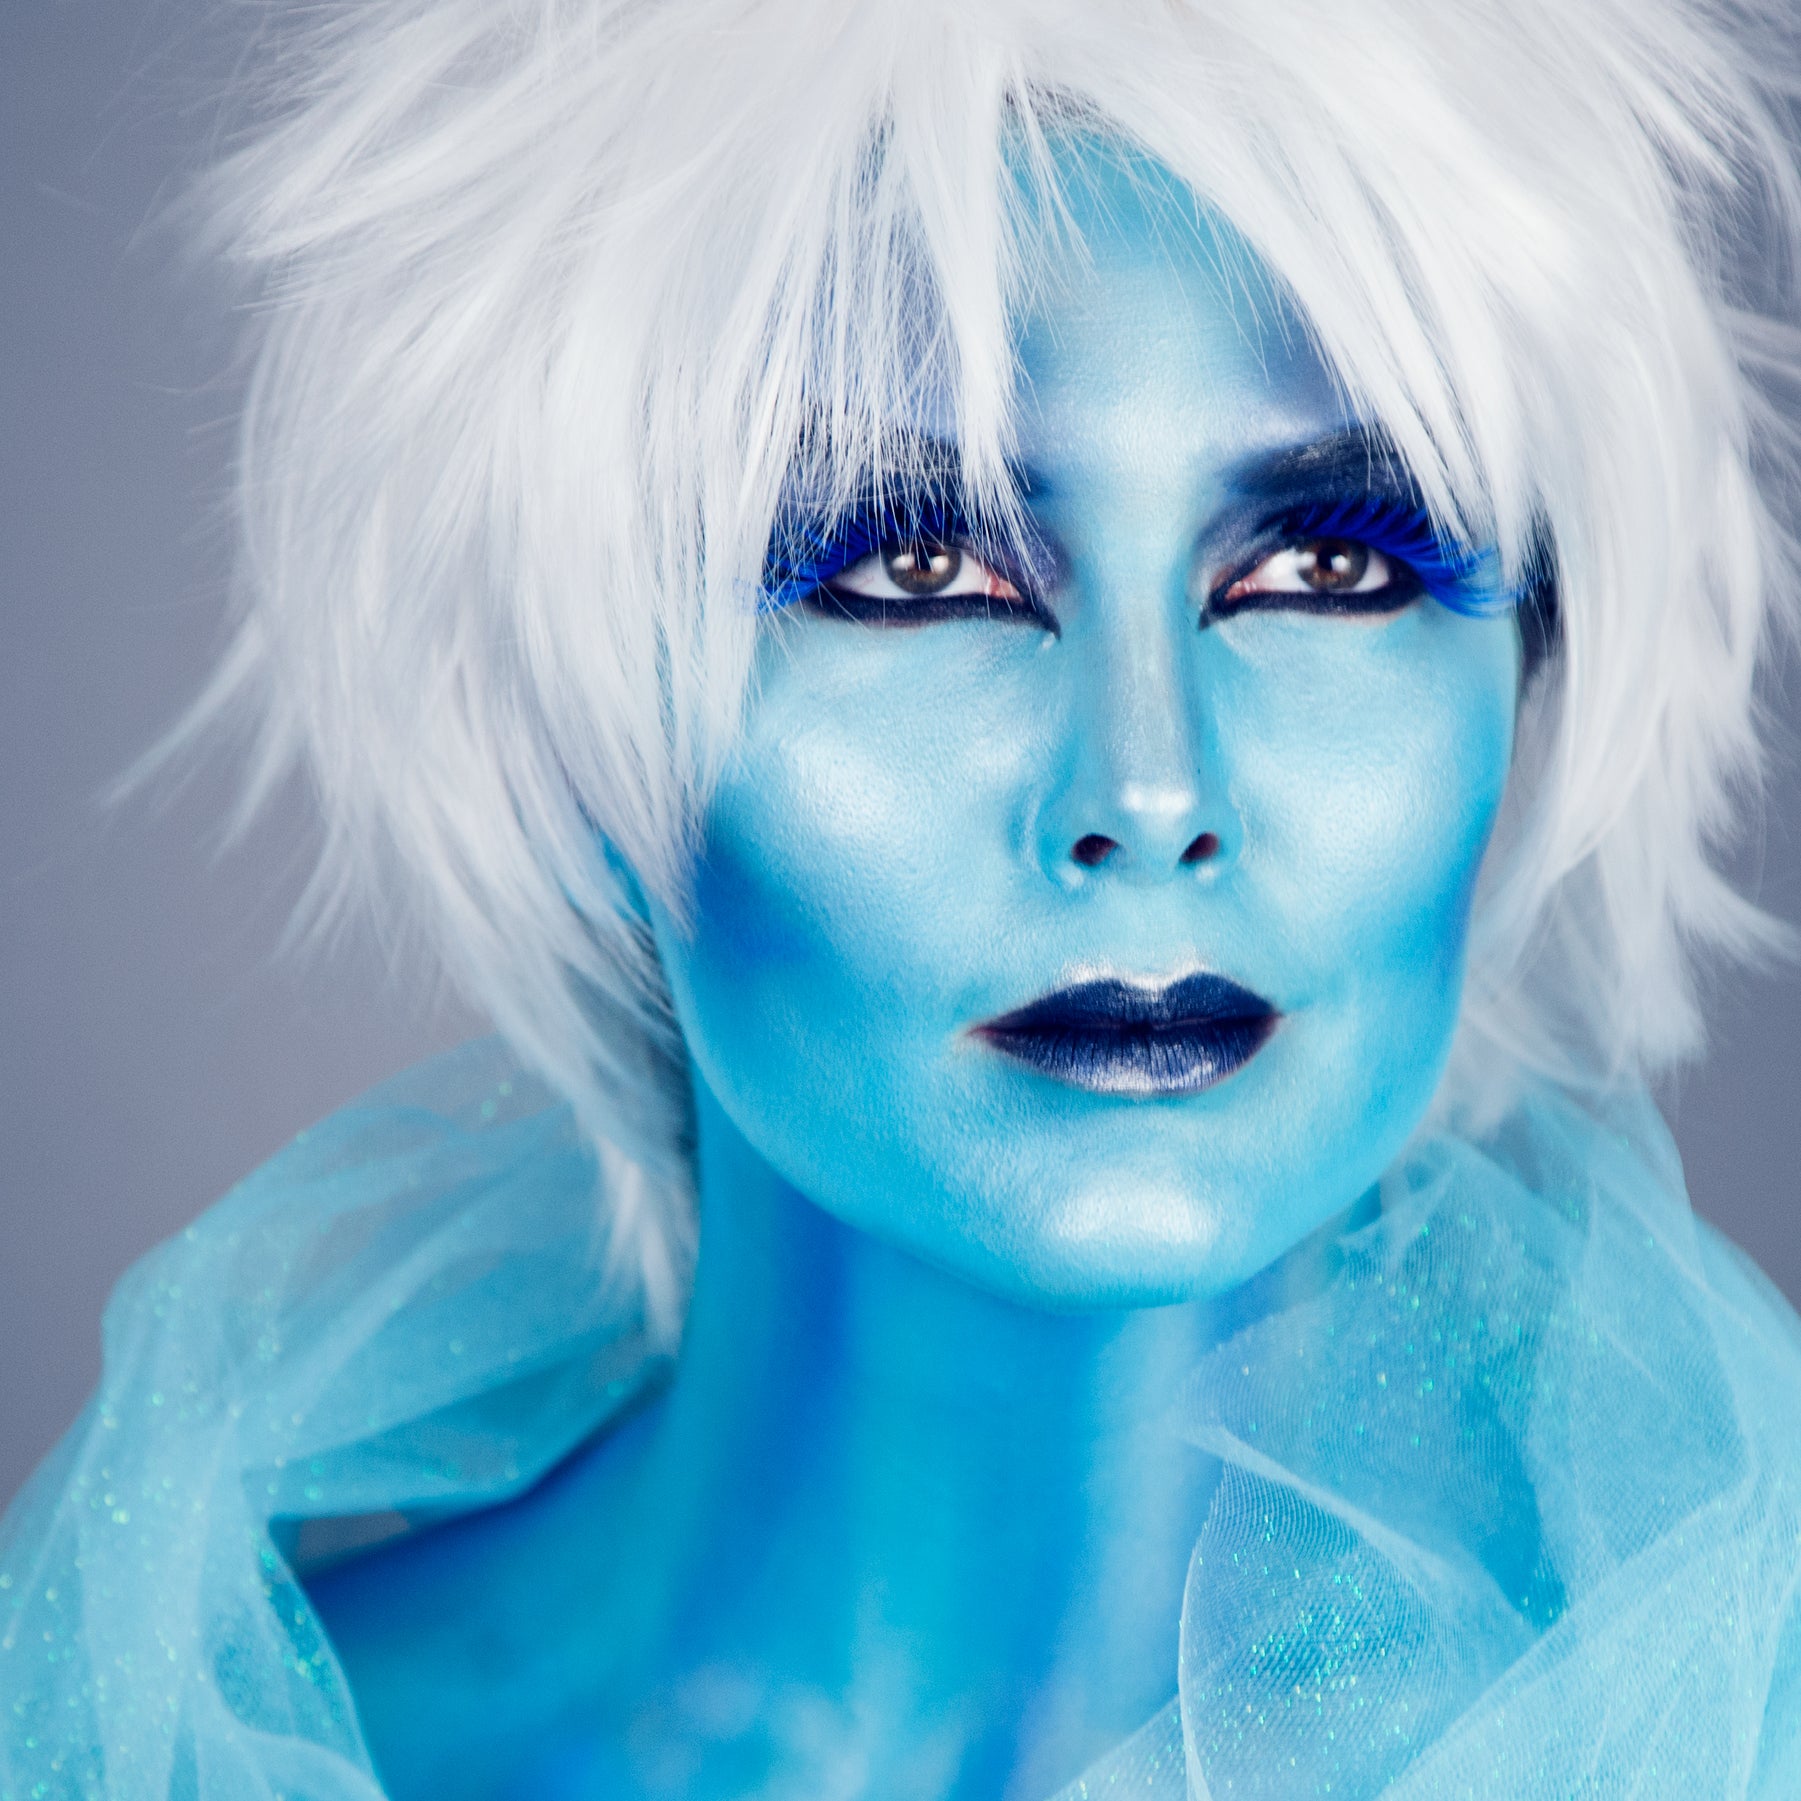 Making of the Ice Queen Makeup Look for Halloween using artis brushes